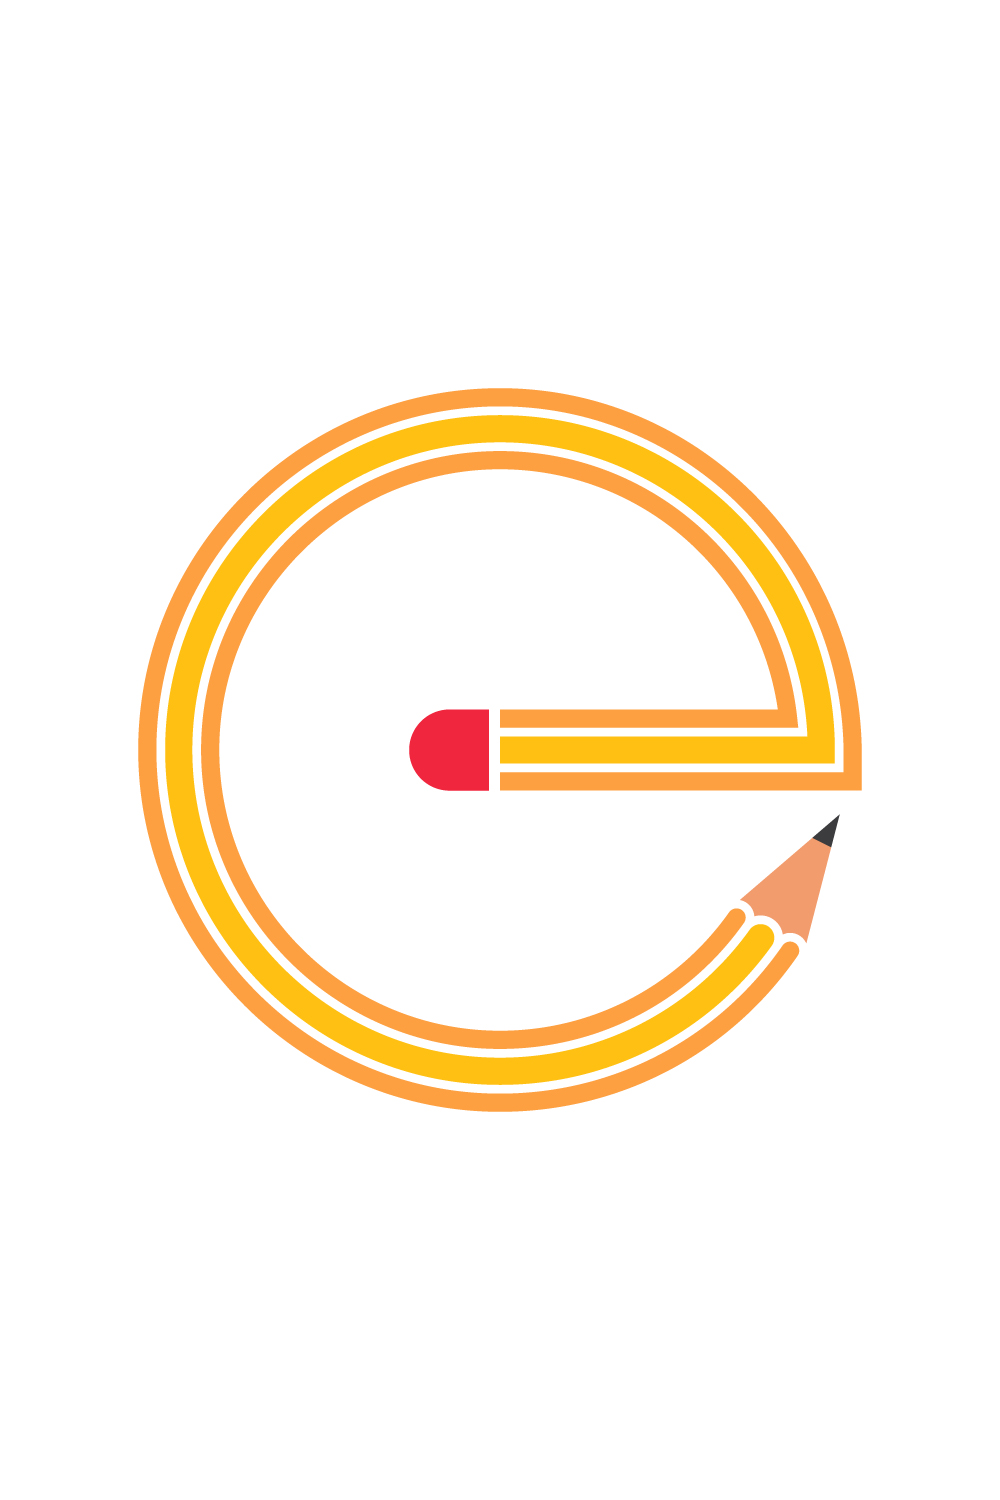 Letter E with Pencil for education business pinterest preview image.